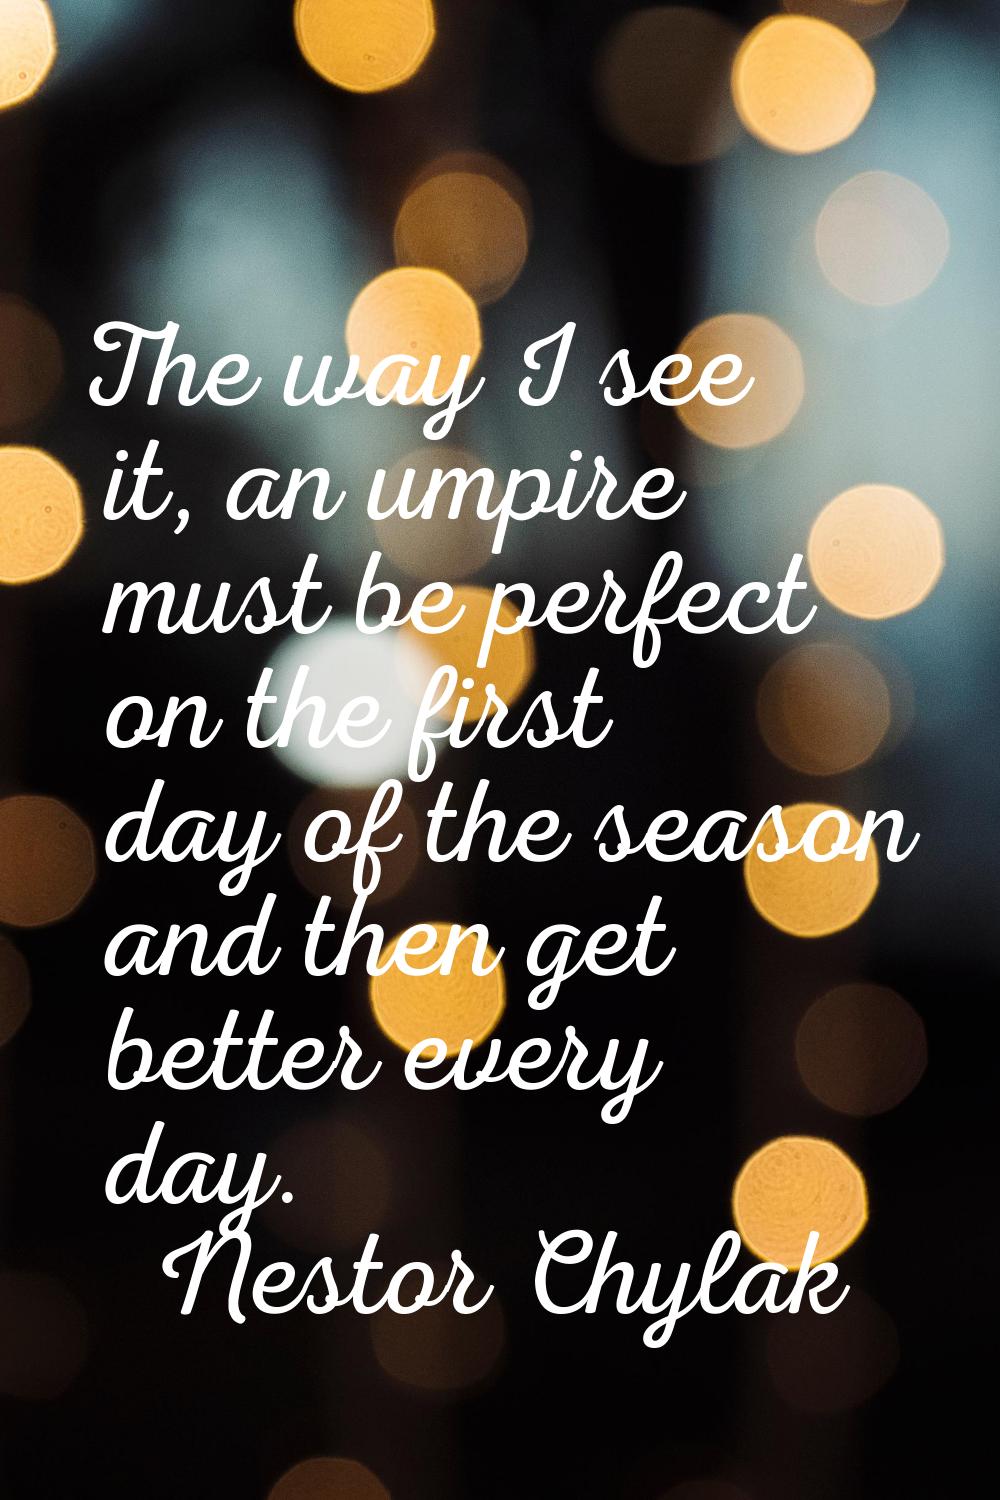 The way I see it, an umpire must be perfect on the first day of the season and then get better ever